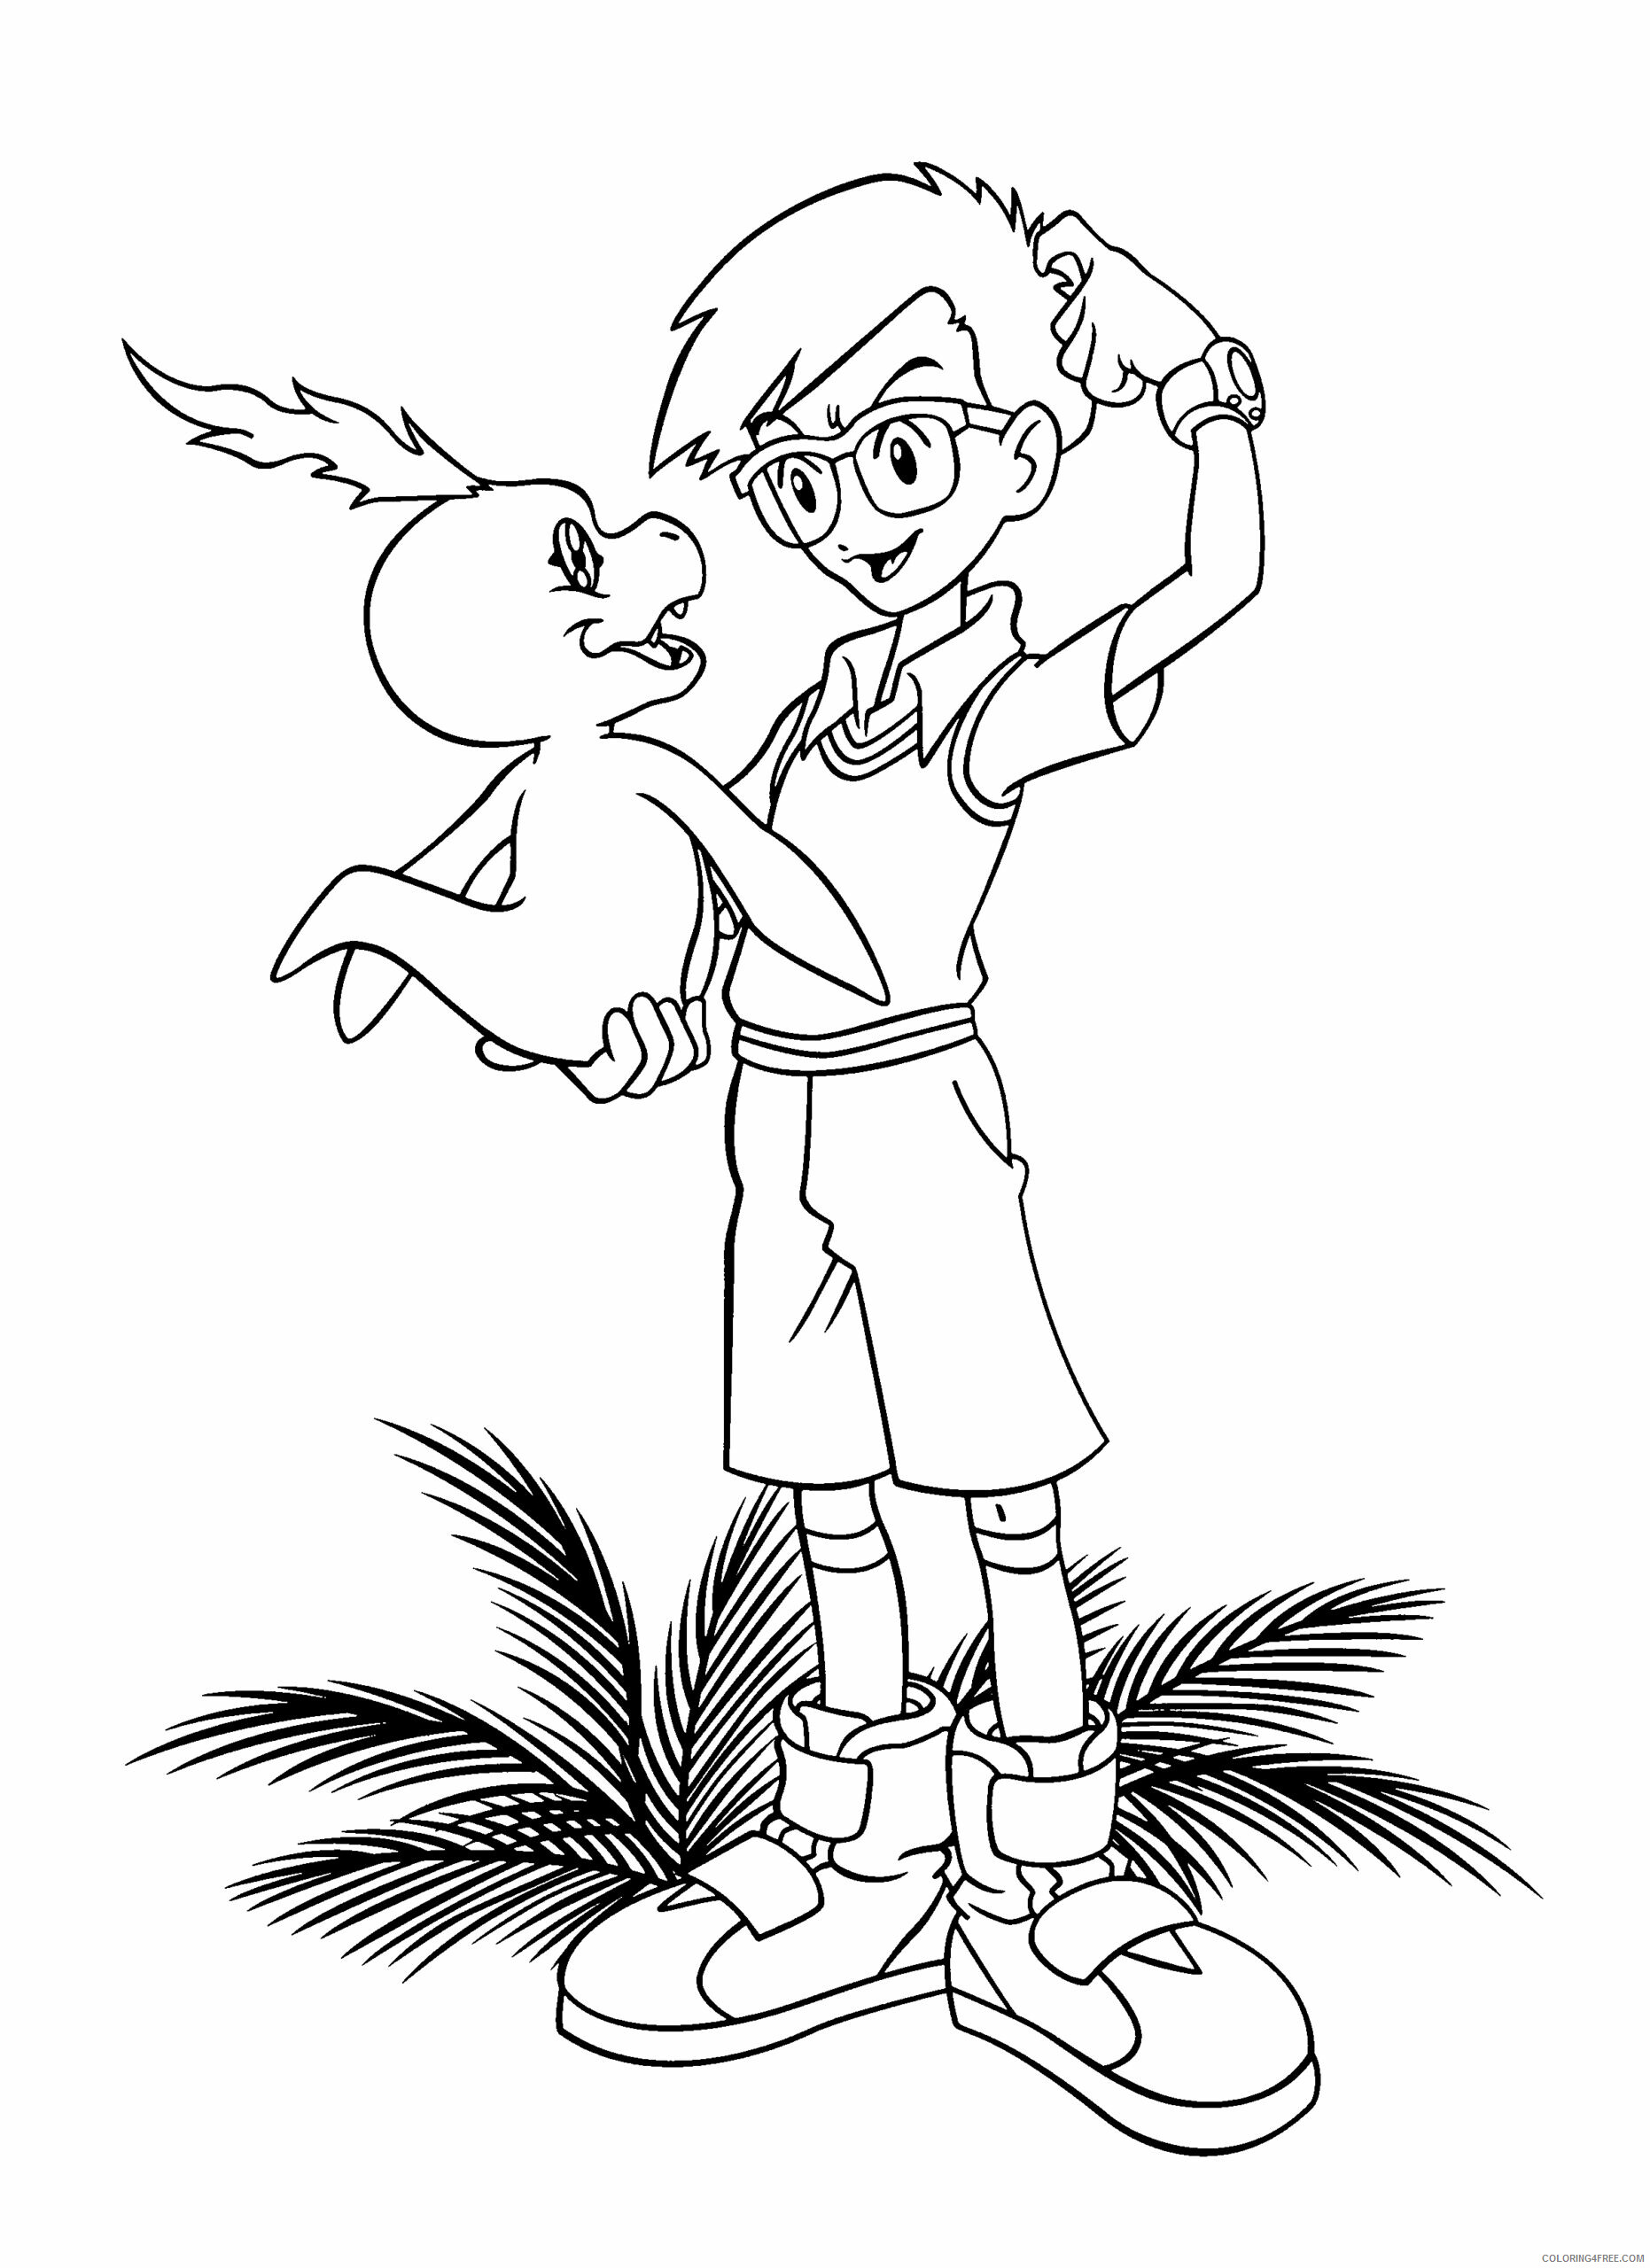 Digimon Printable Coloring Pages Anime digimon z7B3Q 2021 0203 Coloring4free